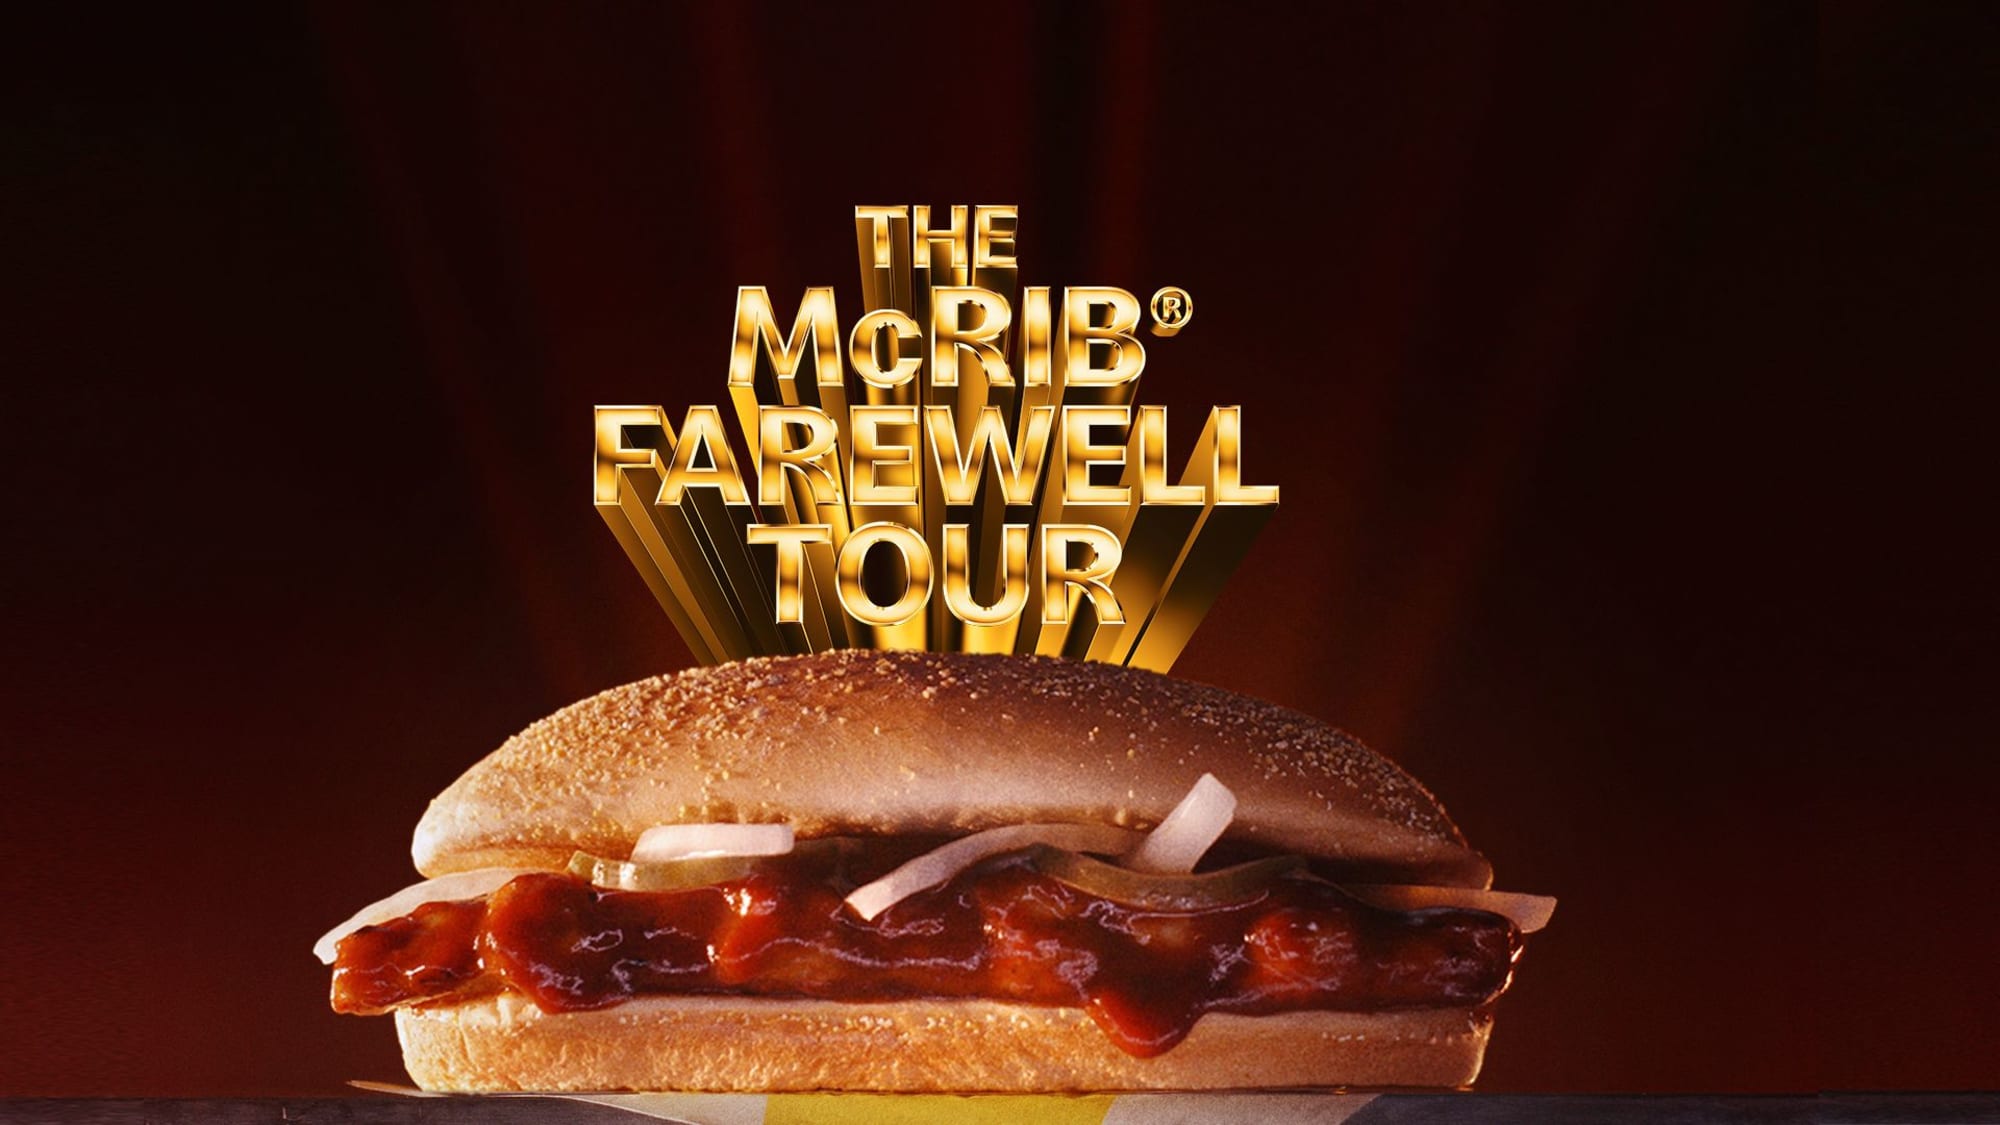 Does the Farewell Tour mean that the McRib leaving the McDonald’s menu